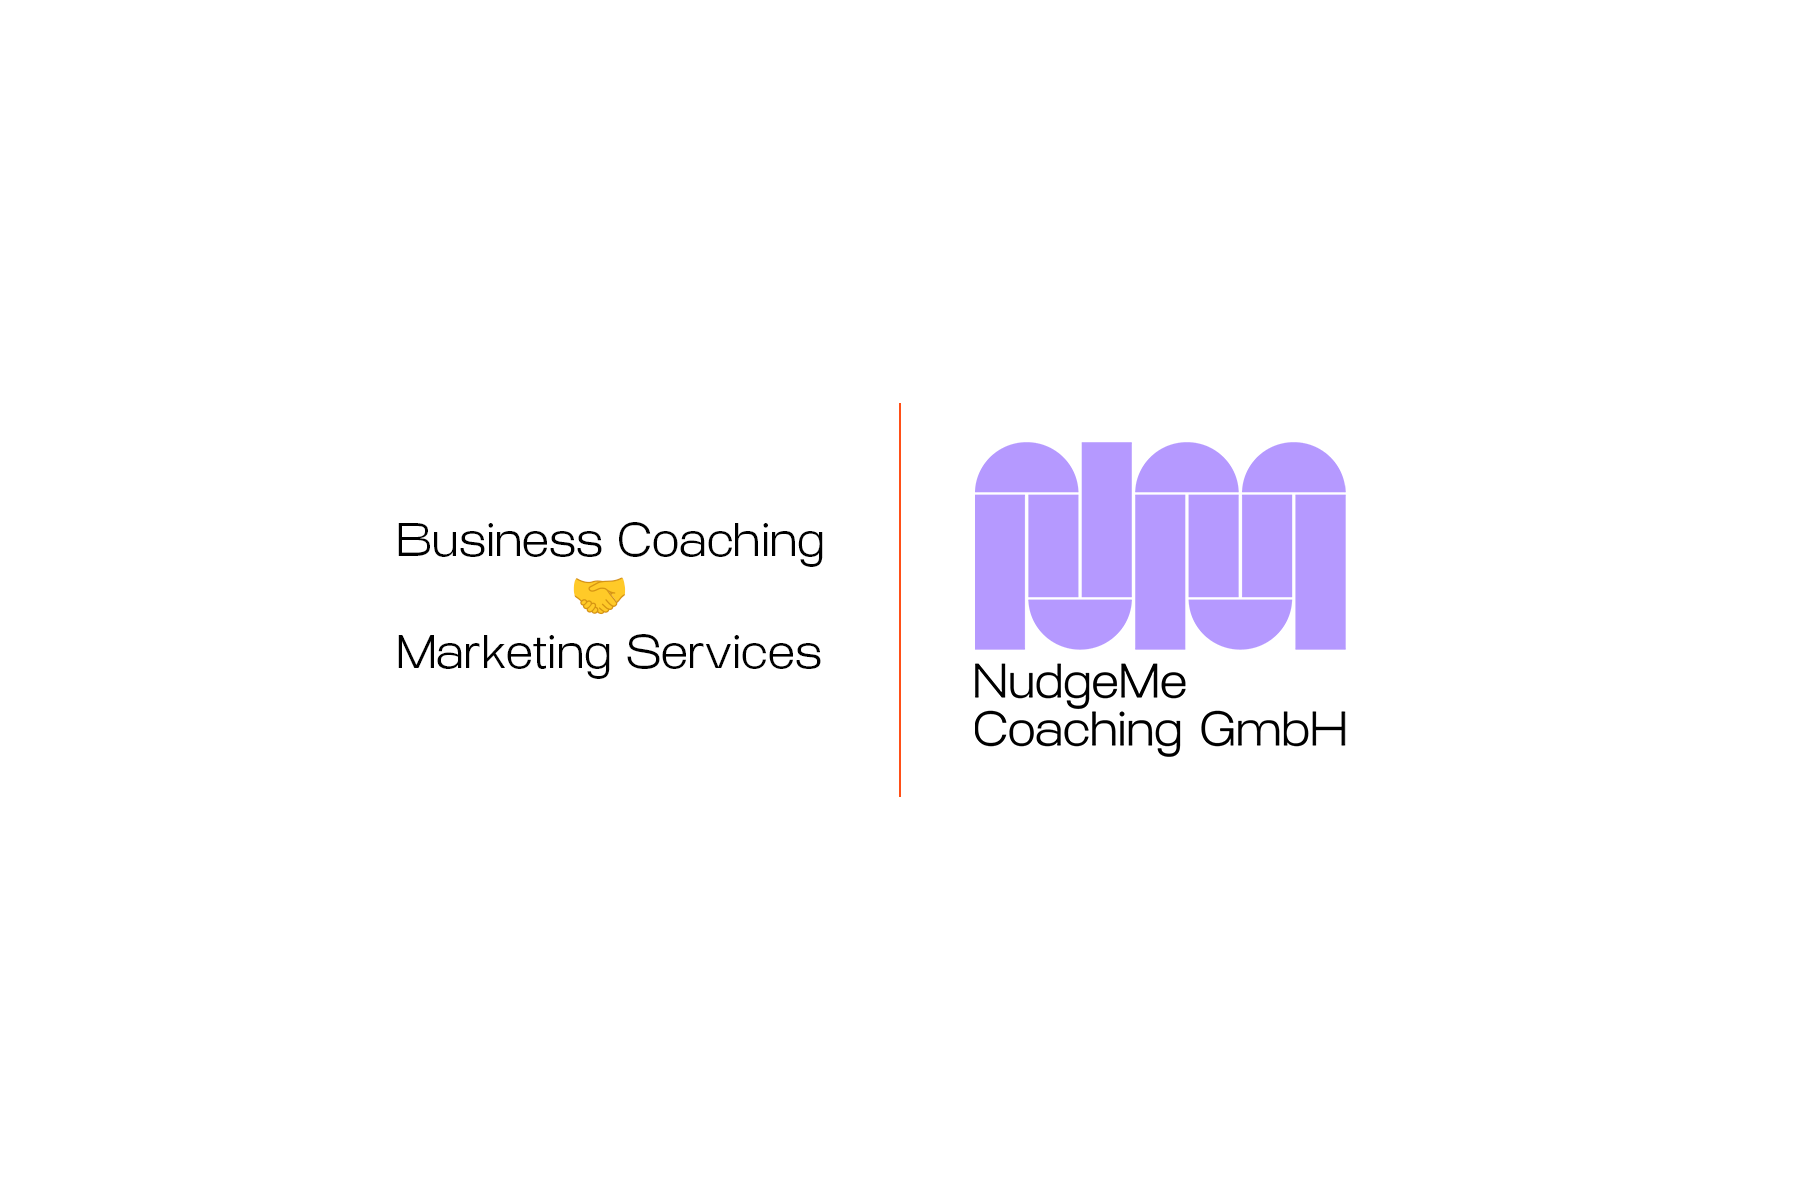 NudgeMe Coaching - Business Coaching meets Marketing Services